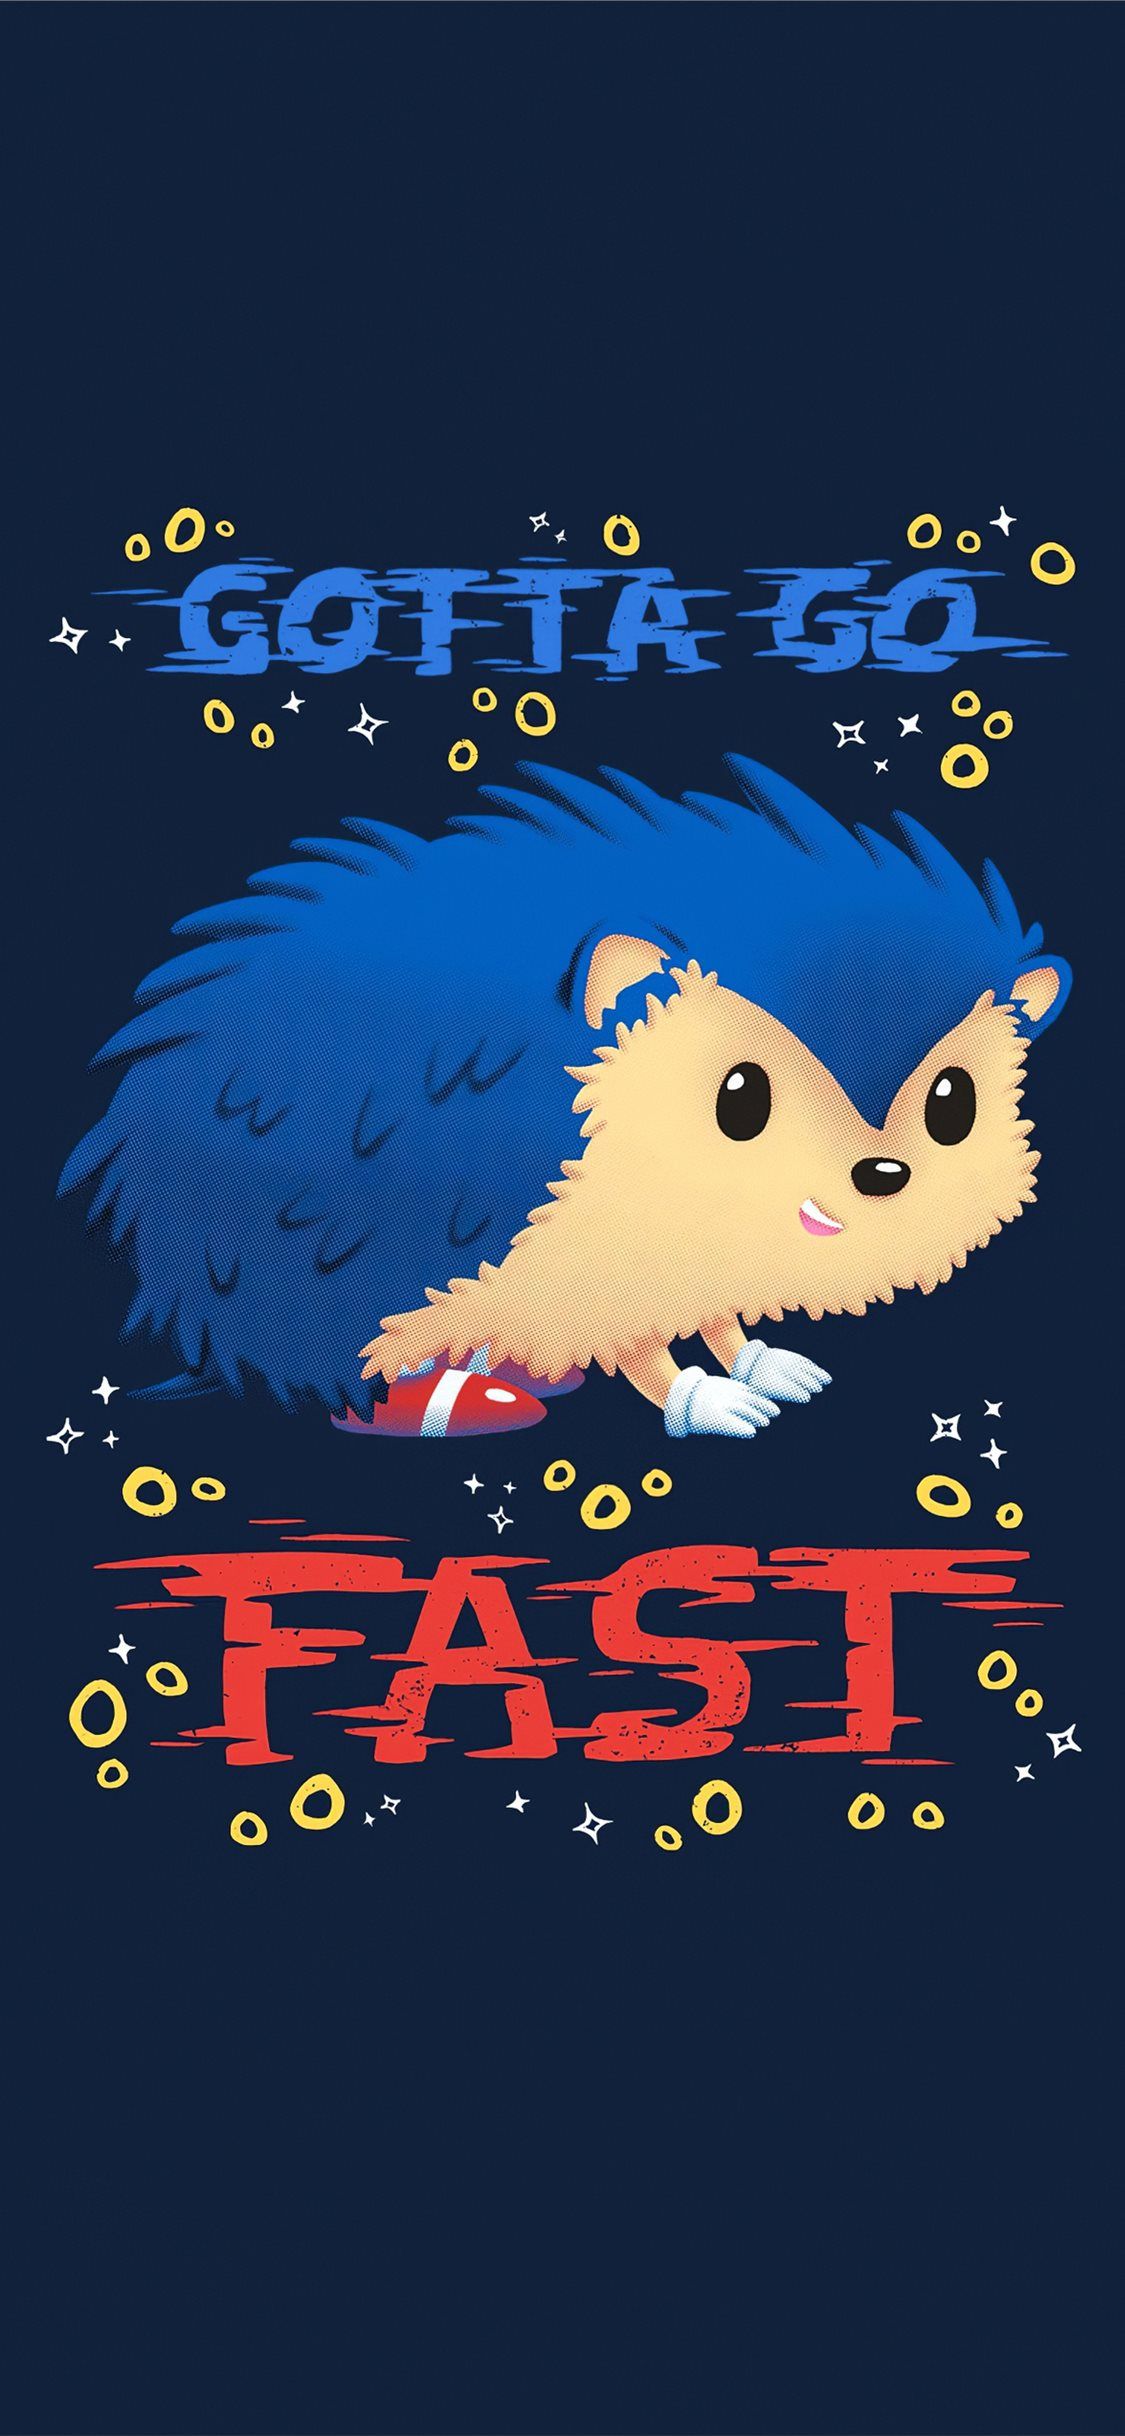 Cute Sonic And Pikachu Wallpapers